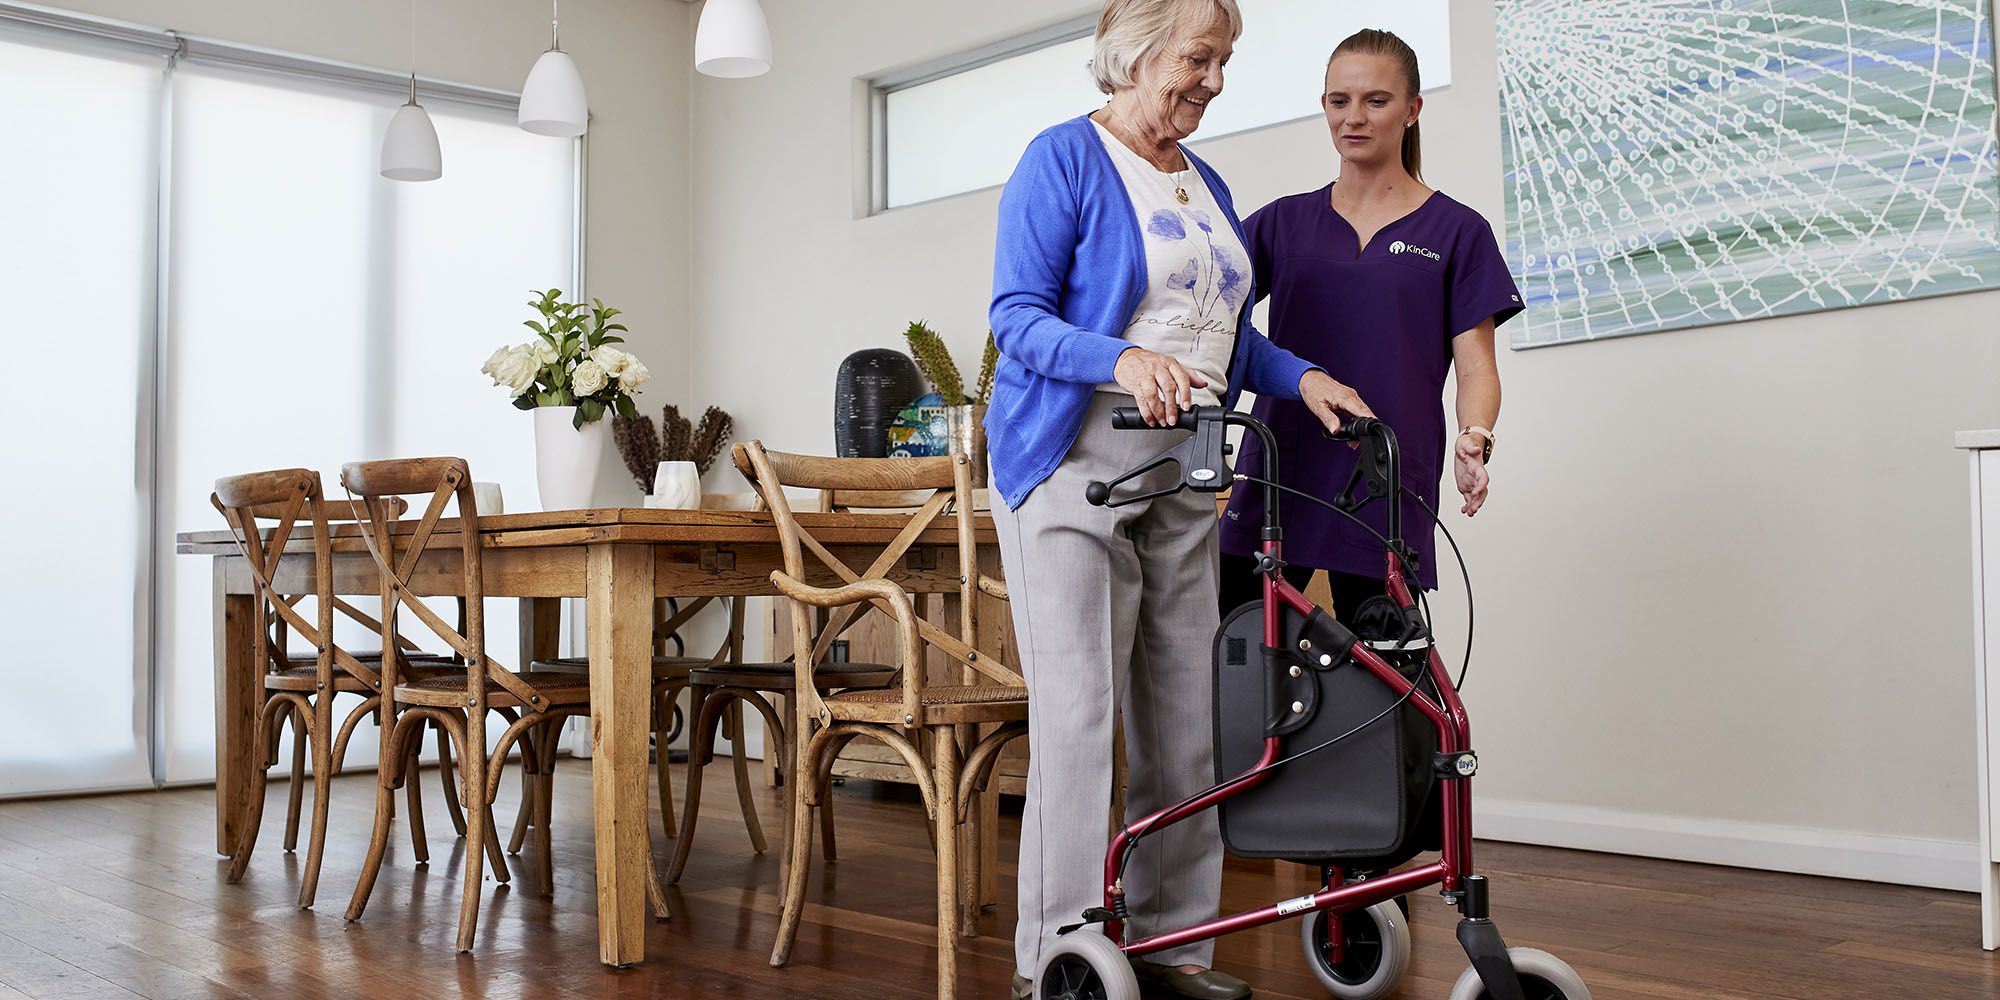 A woman is assisted to use her walker by a KinCare Home Care Worker